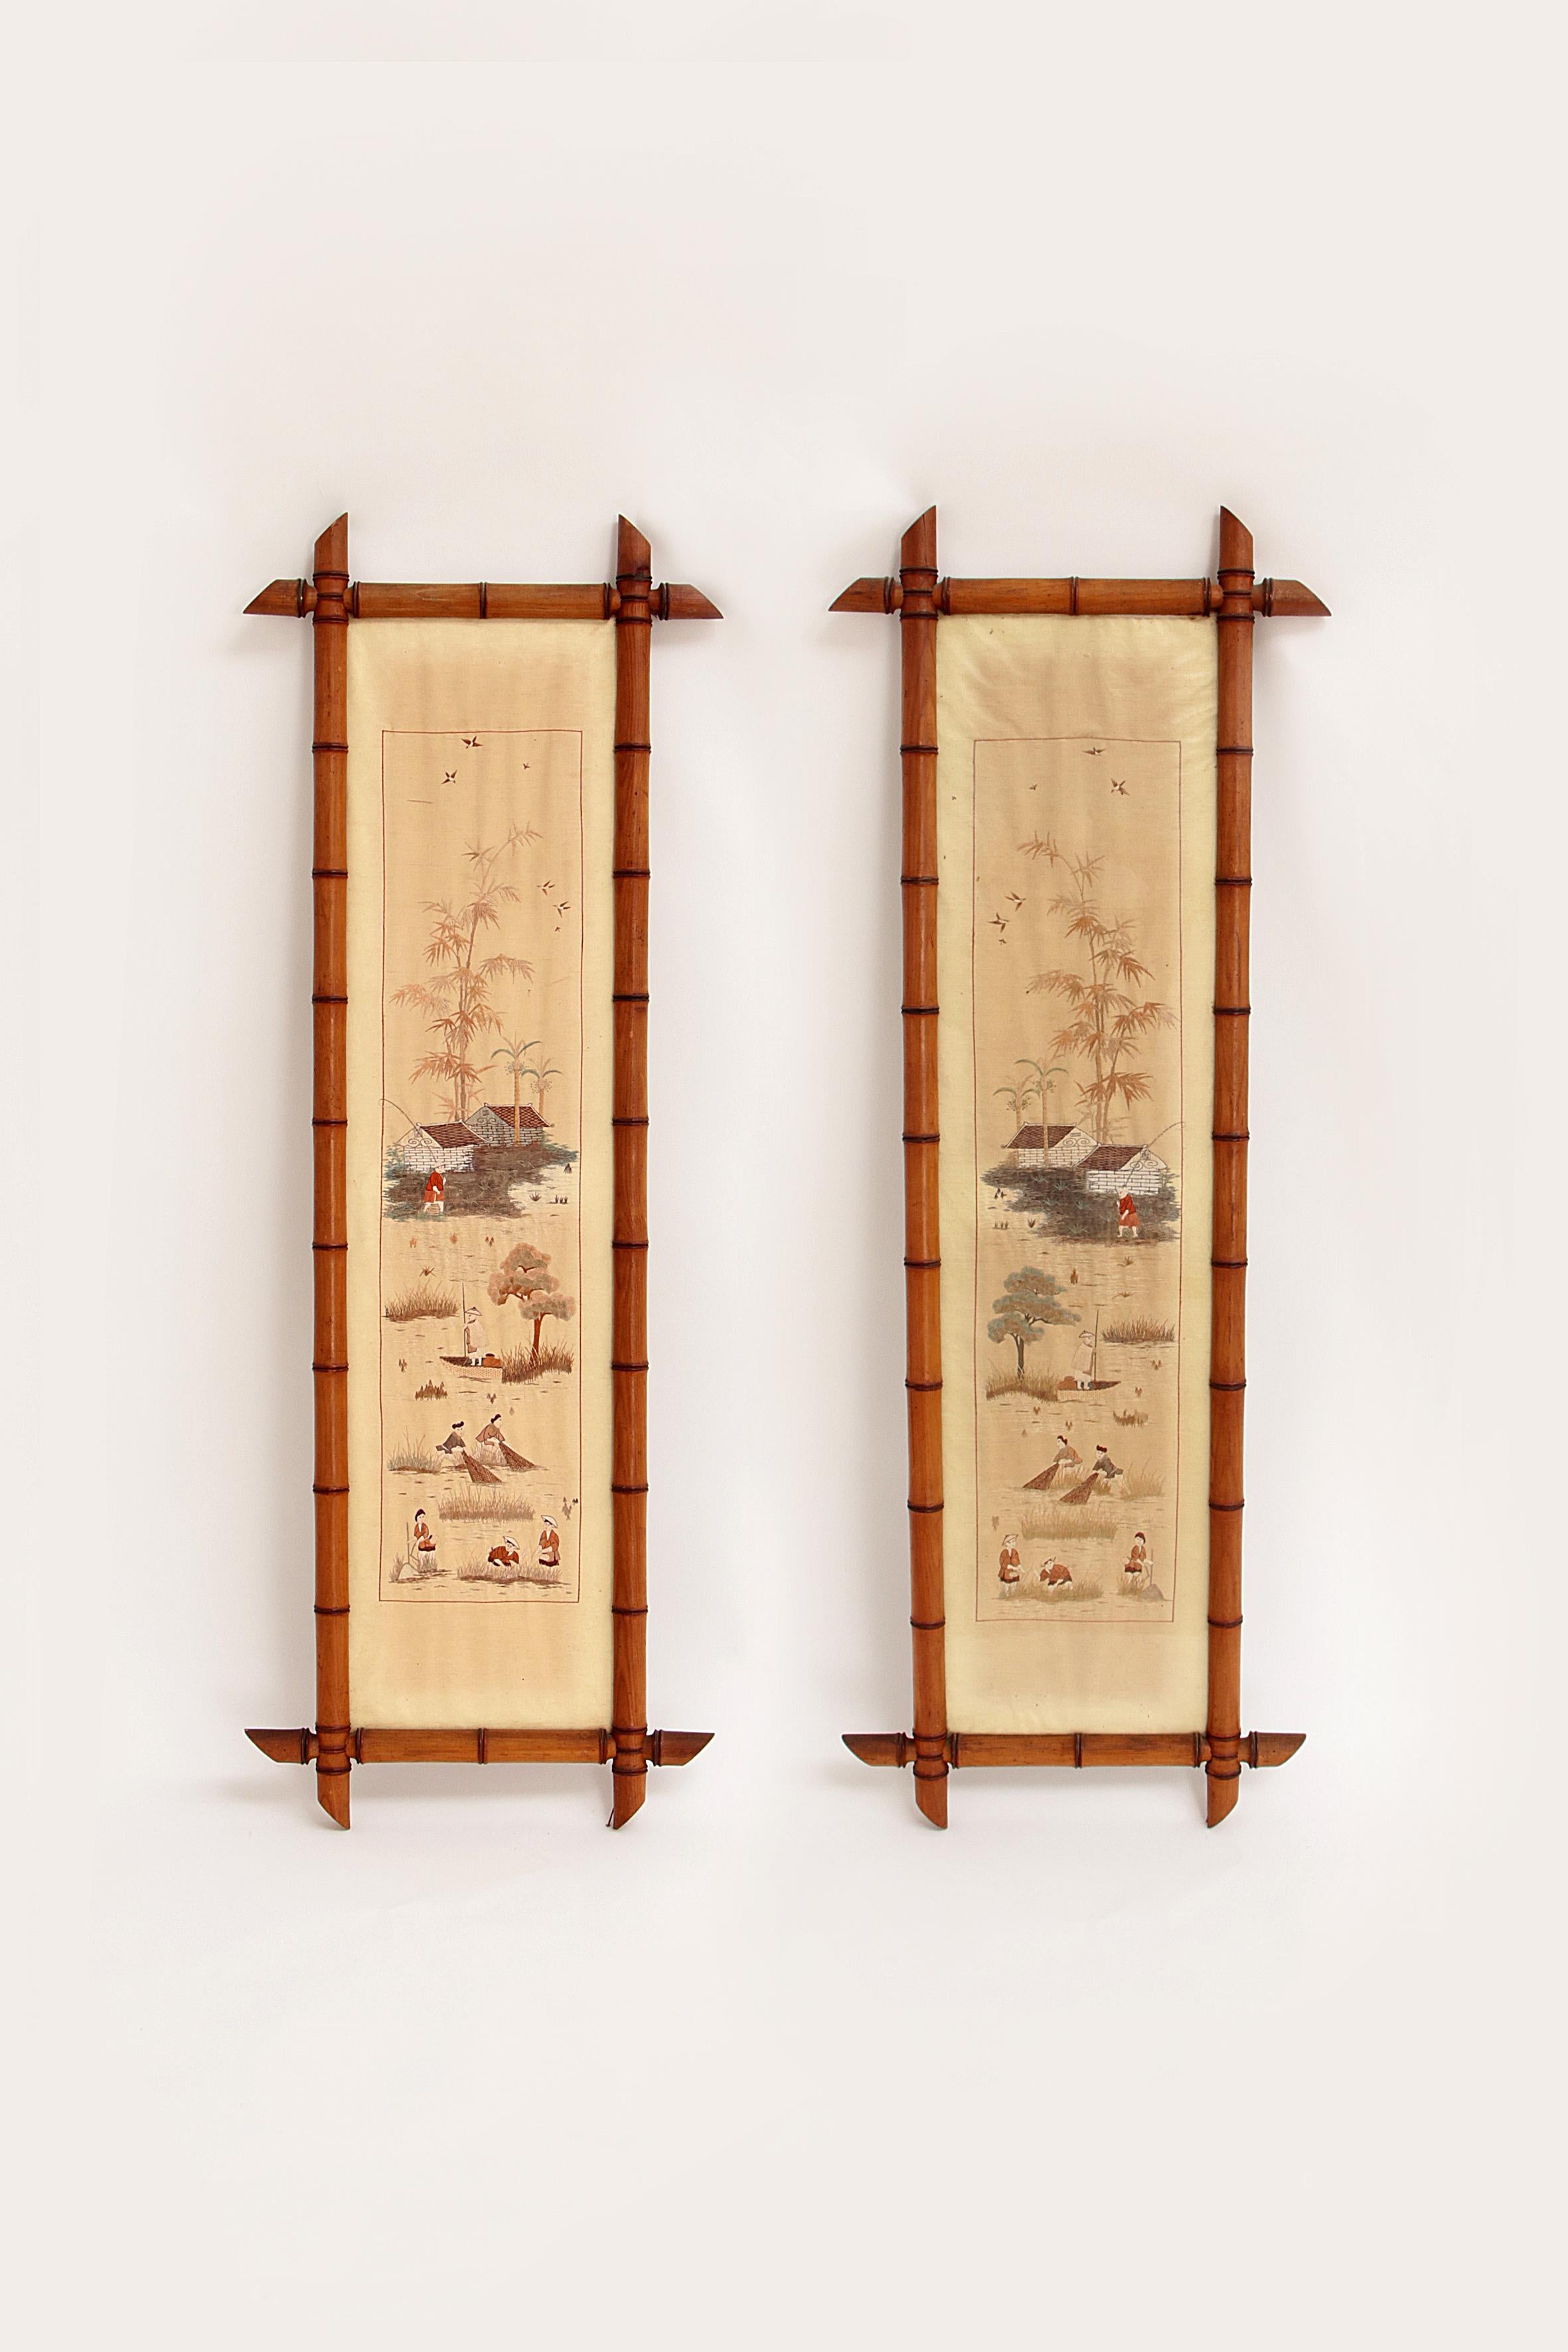 A set of 19th-century Chinese silk tapestries, woven or embroidered entirely by hand.

Left and right represents a fishing village with women and men fishing at the net.

Both bamboo frames are intact, only one still has the original